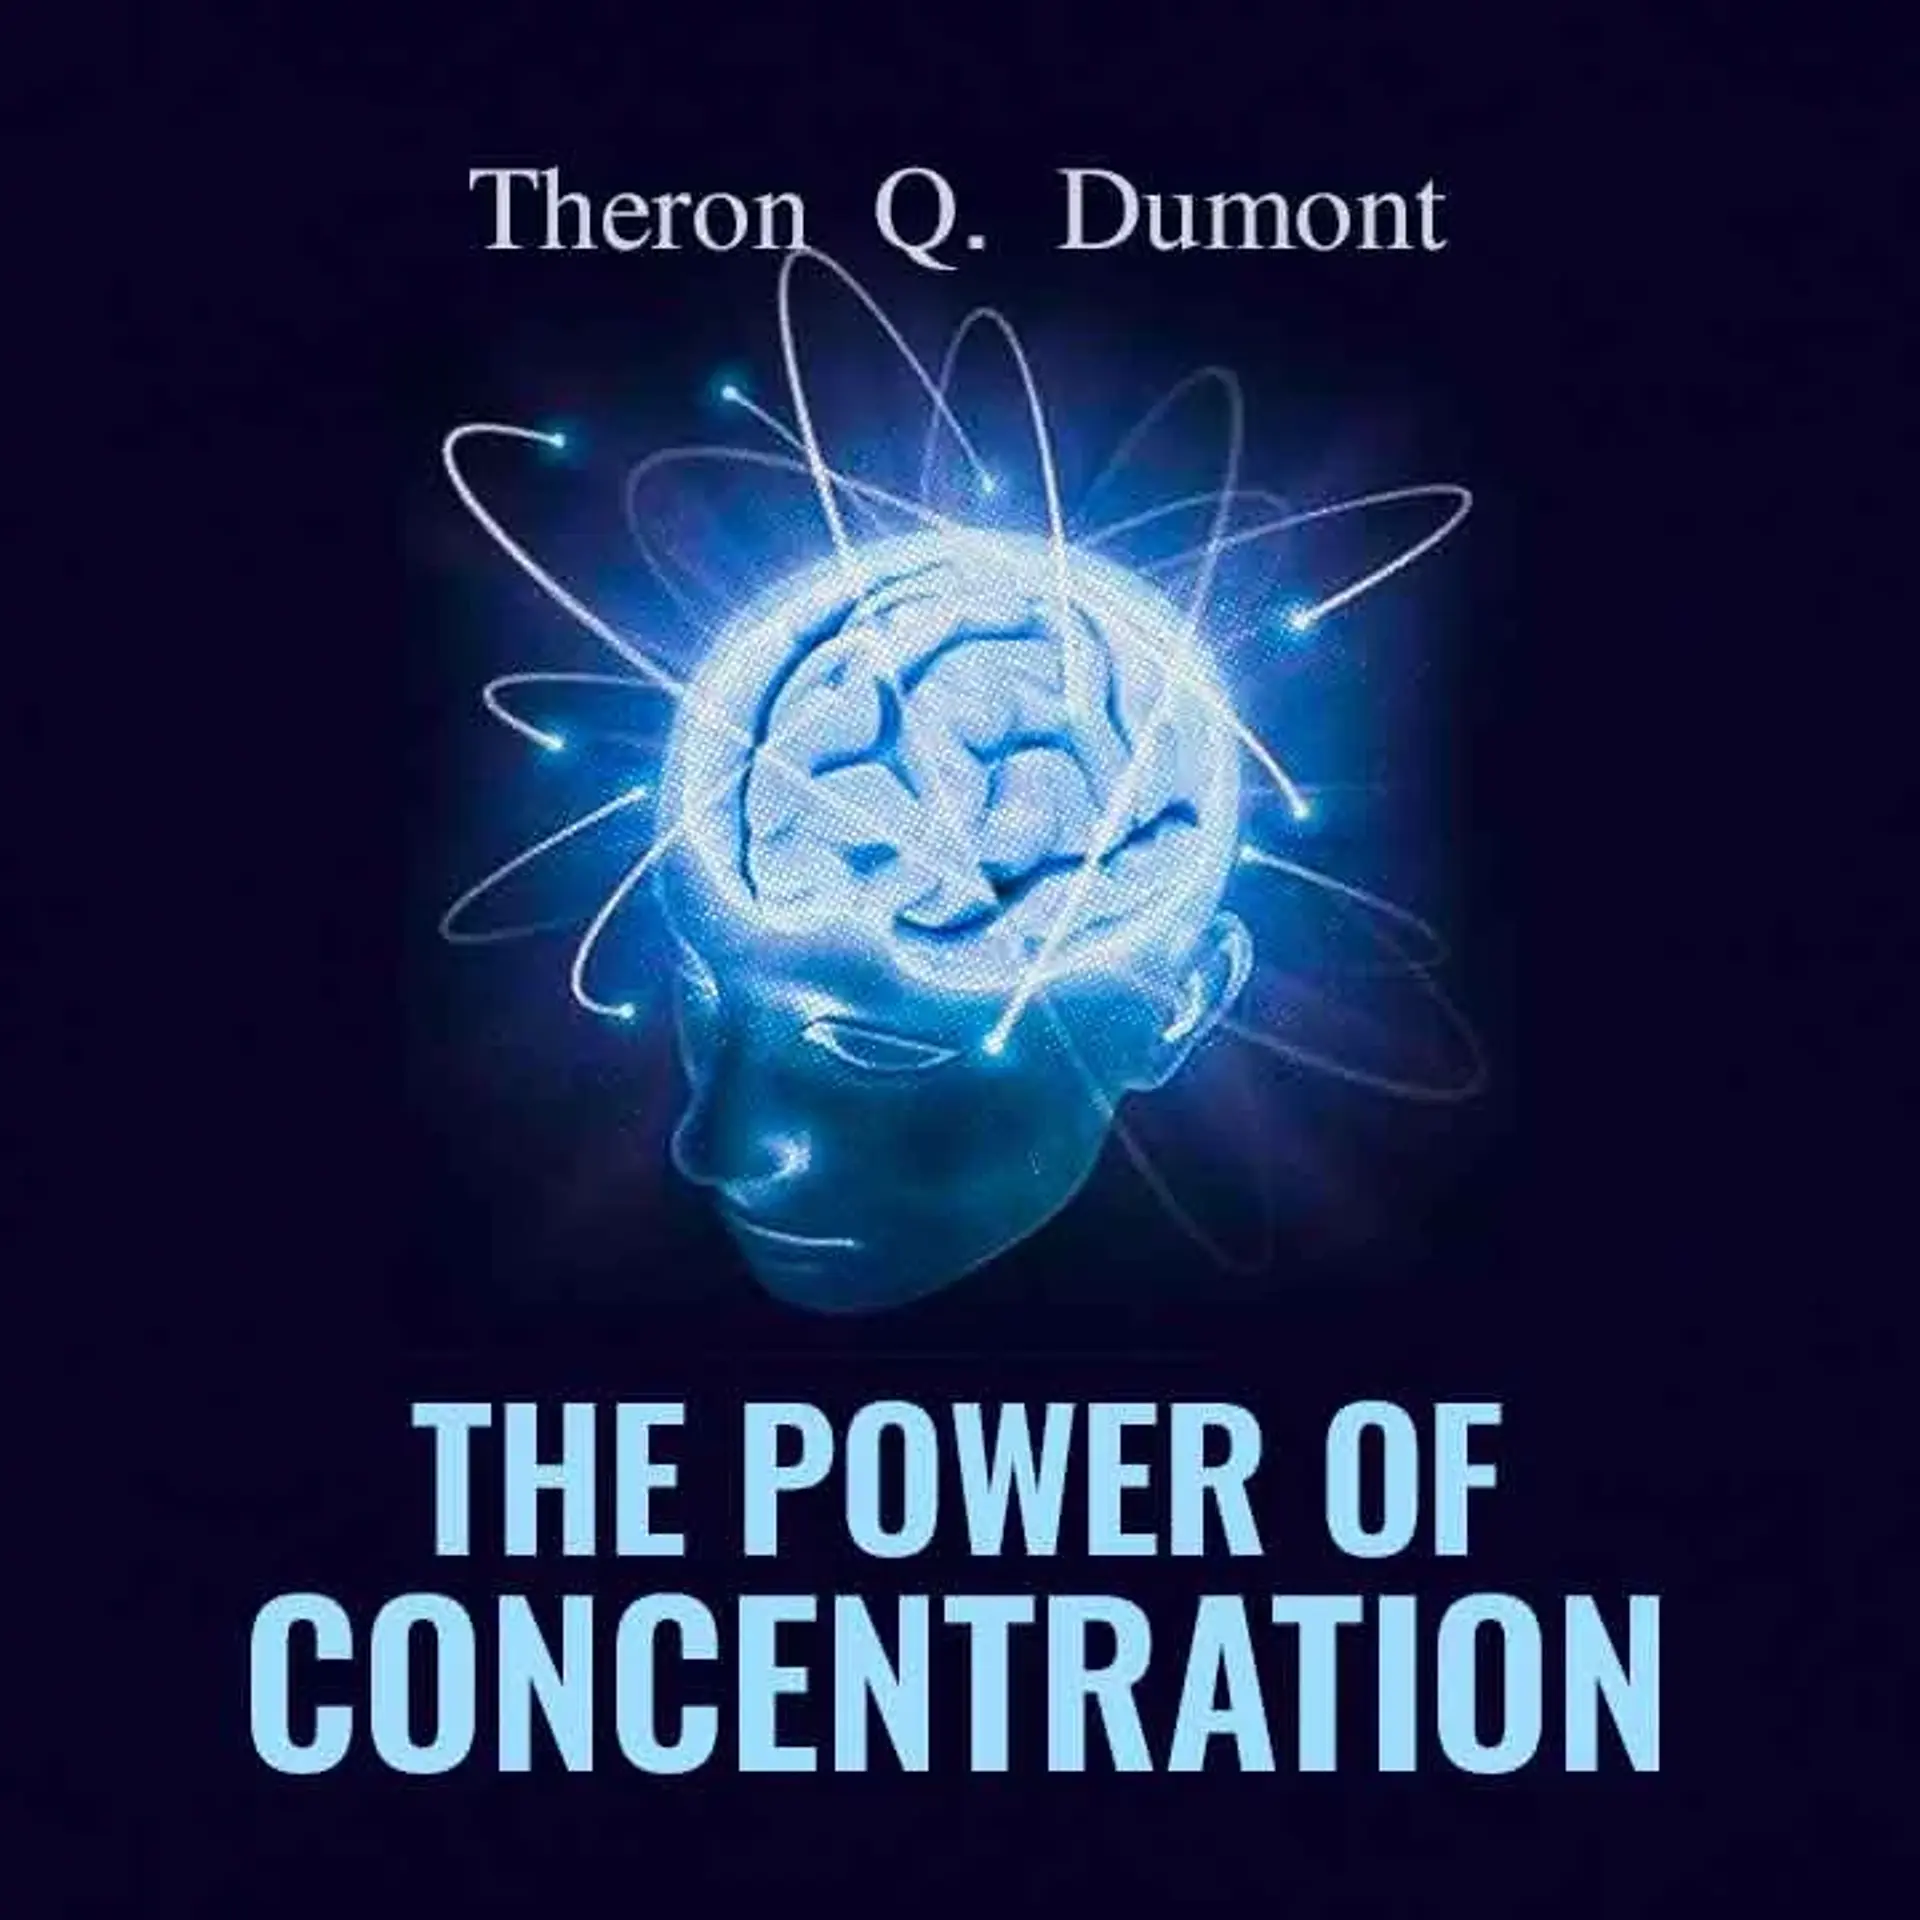 Chapter 5 - How Concentrated Thought Links All Humanity Together